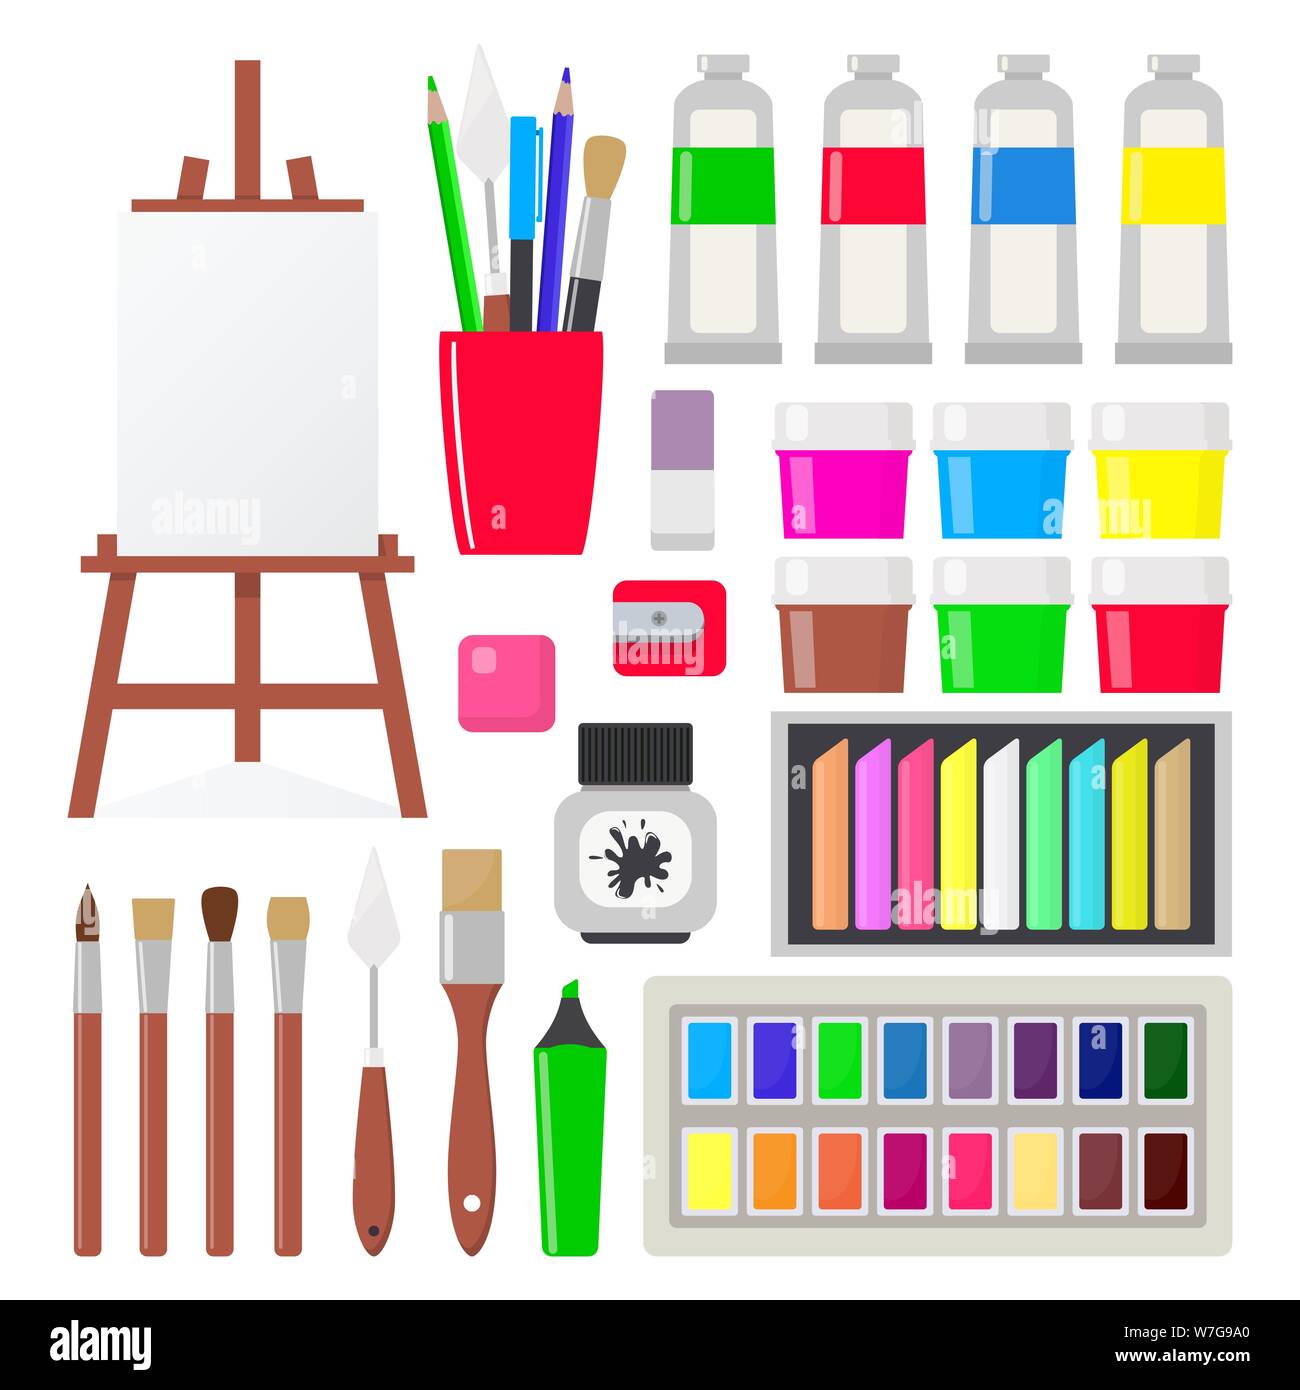 https://c8.alamy.com/comp/W7G9A0/painting-tools-elements-in-flat-style-set-art-supplies-easel-with-canvas-paint-tubes-brushes-pencil-gouache-watercolor-oil-paints-crayons-pas-W7G9A0.jpg